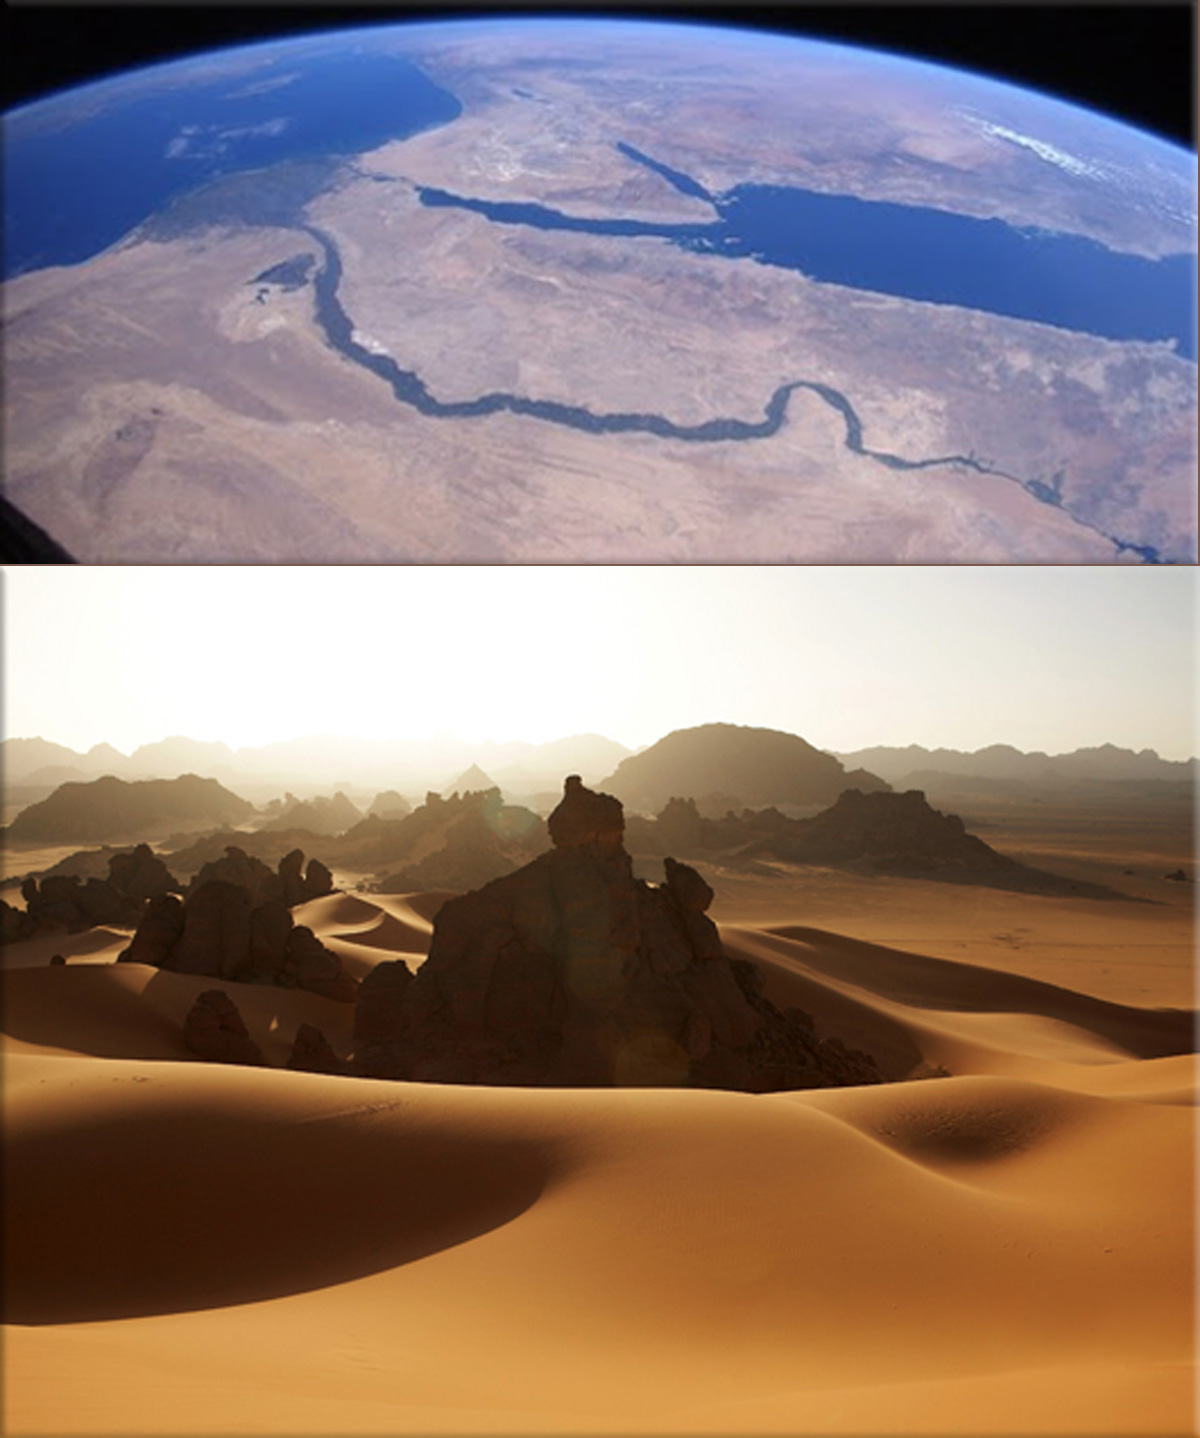 Sahara Desert;</a>the world's largest and hottest desert and third largest desert, after Antarctica and the Arctic, covering most of North Africa, making it almost as large as China or the United States